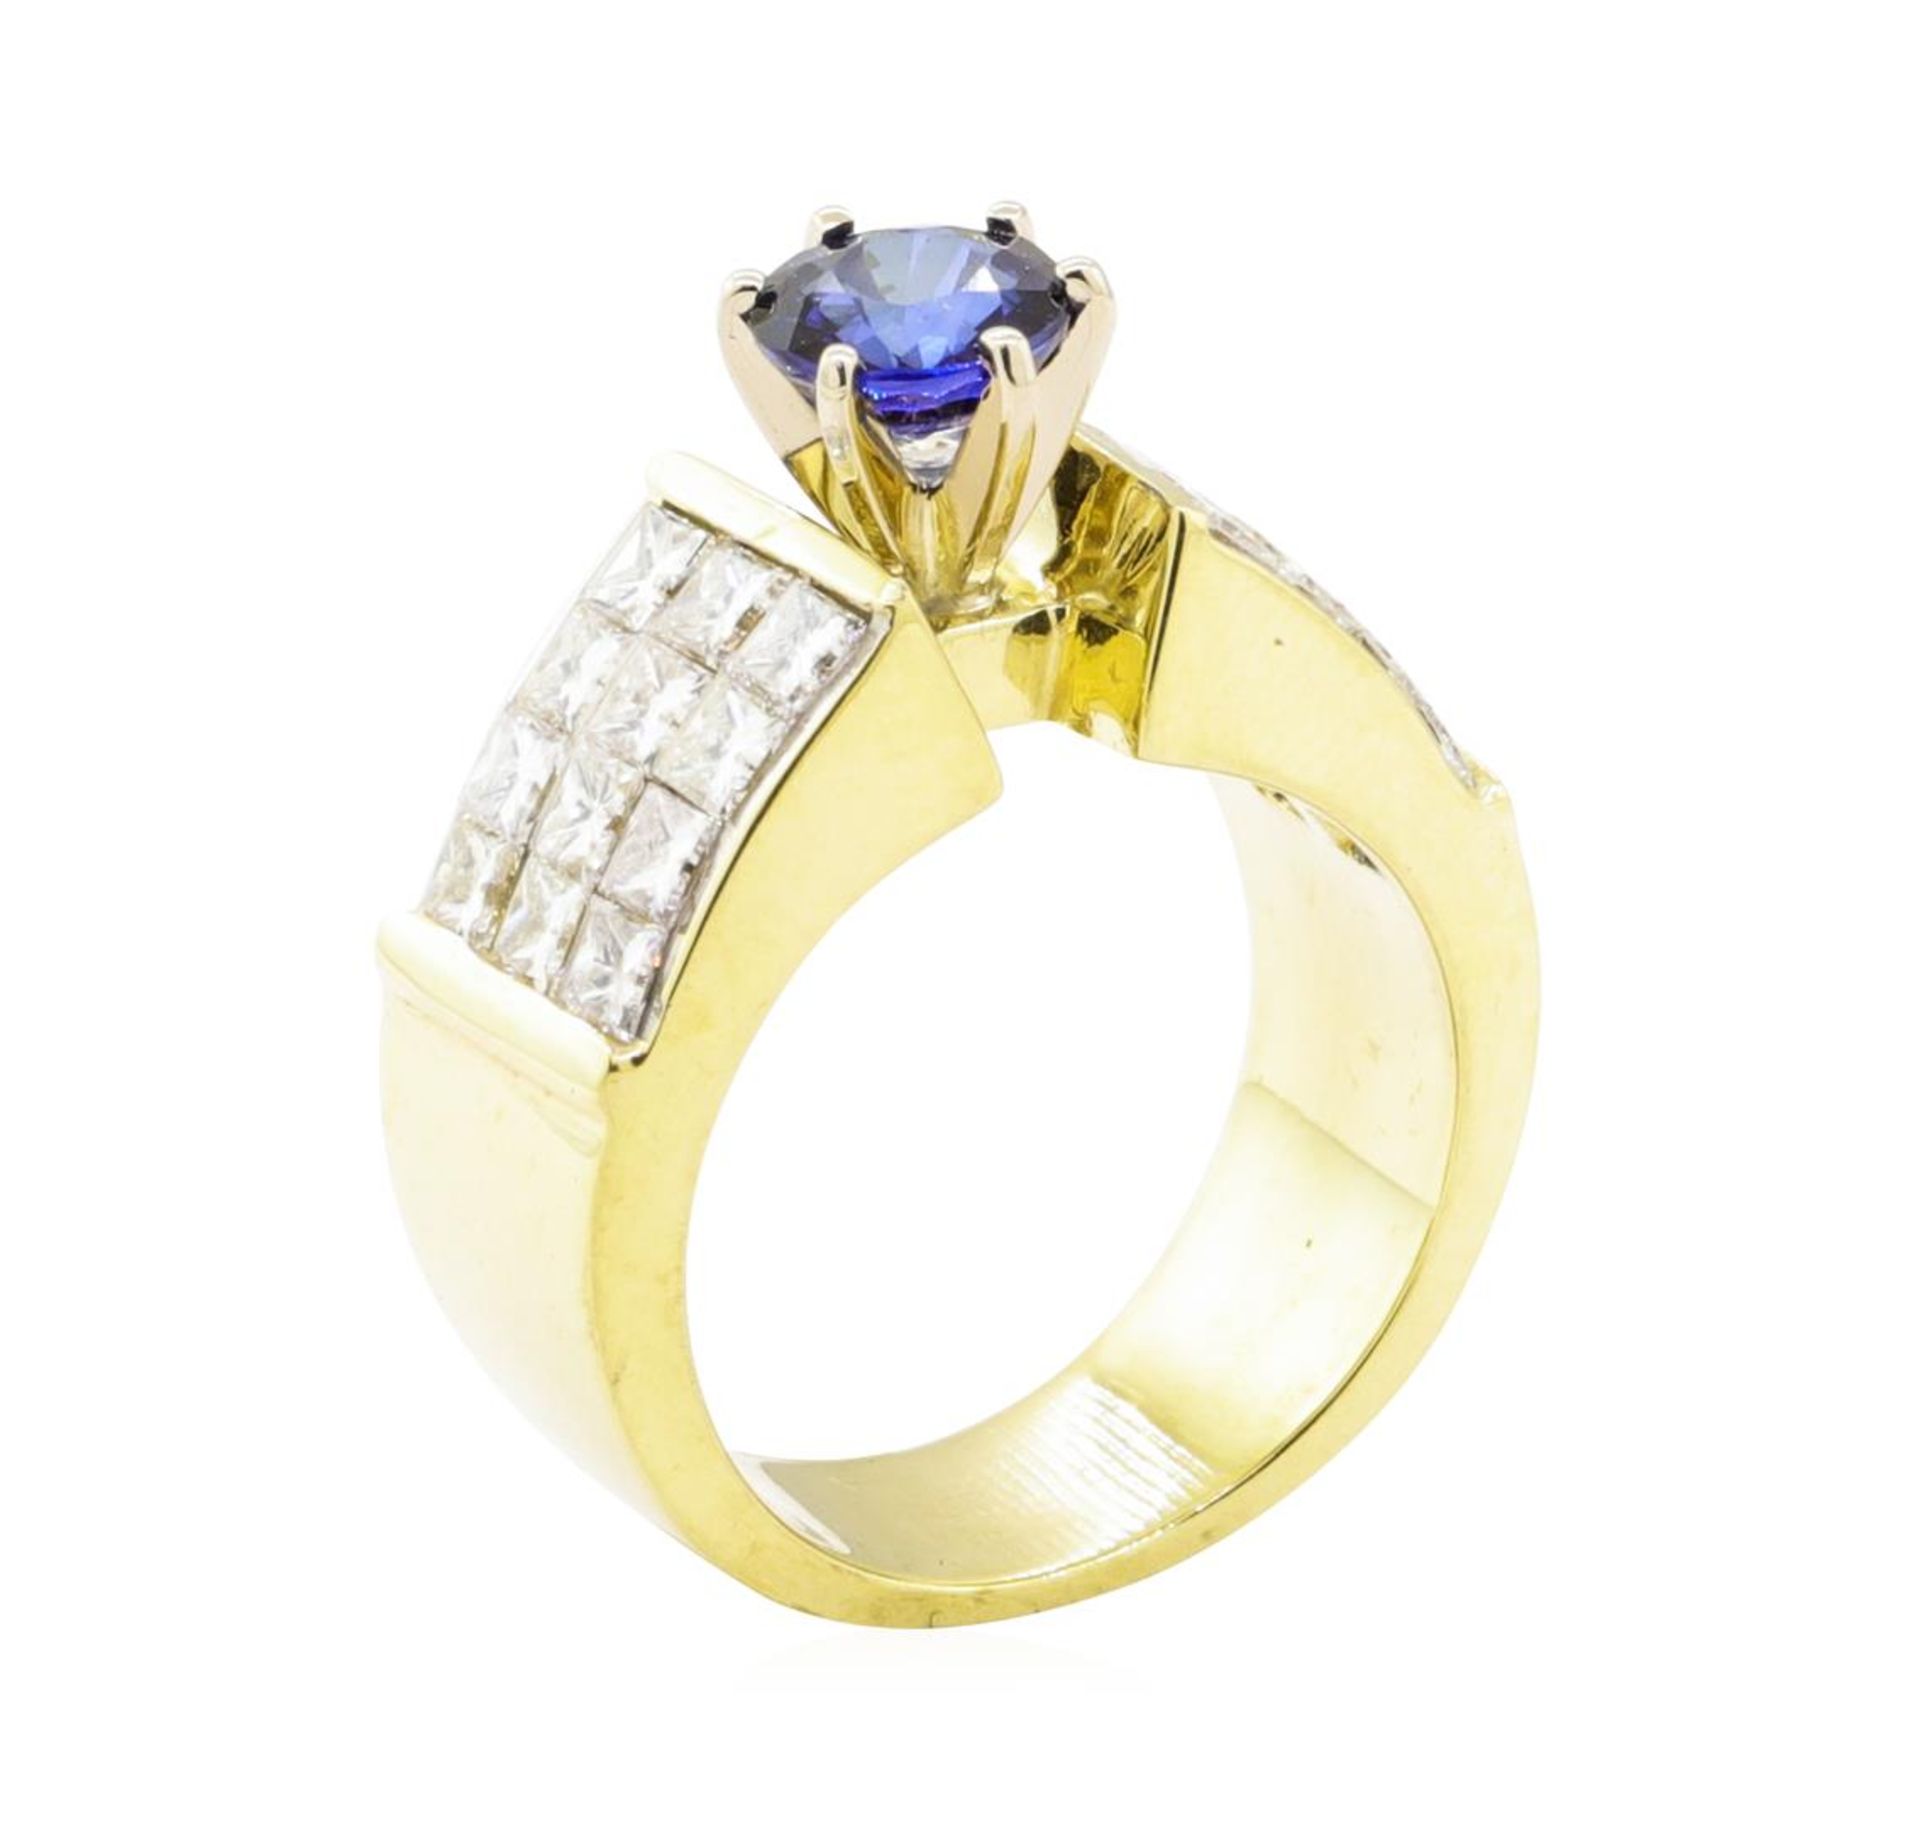 3.18 ctw Blue Sapphire And Diamond Ring - 18KT Yellow Gold - Image 4 of 5